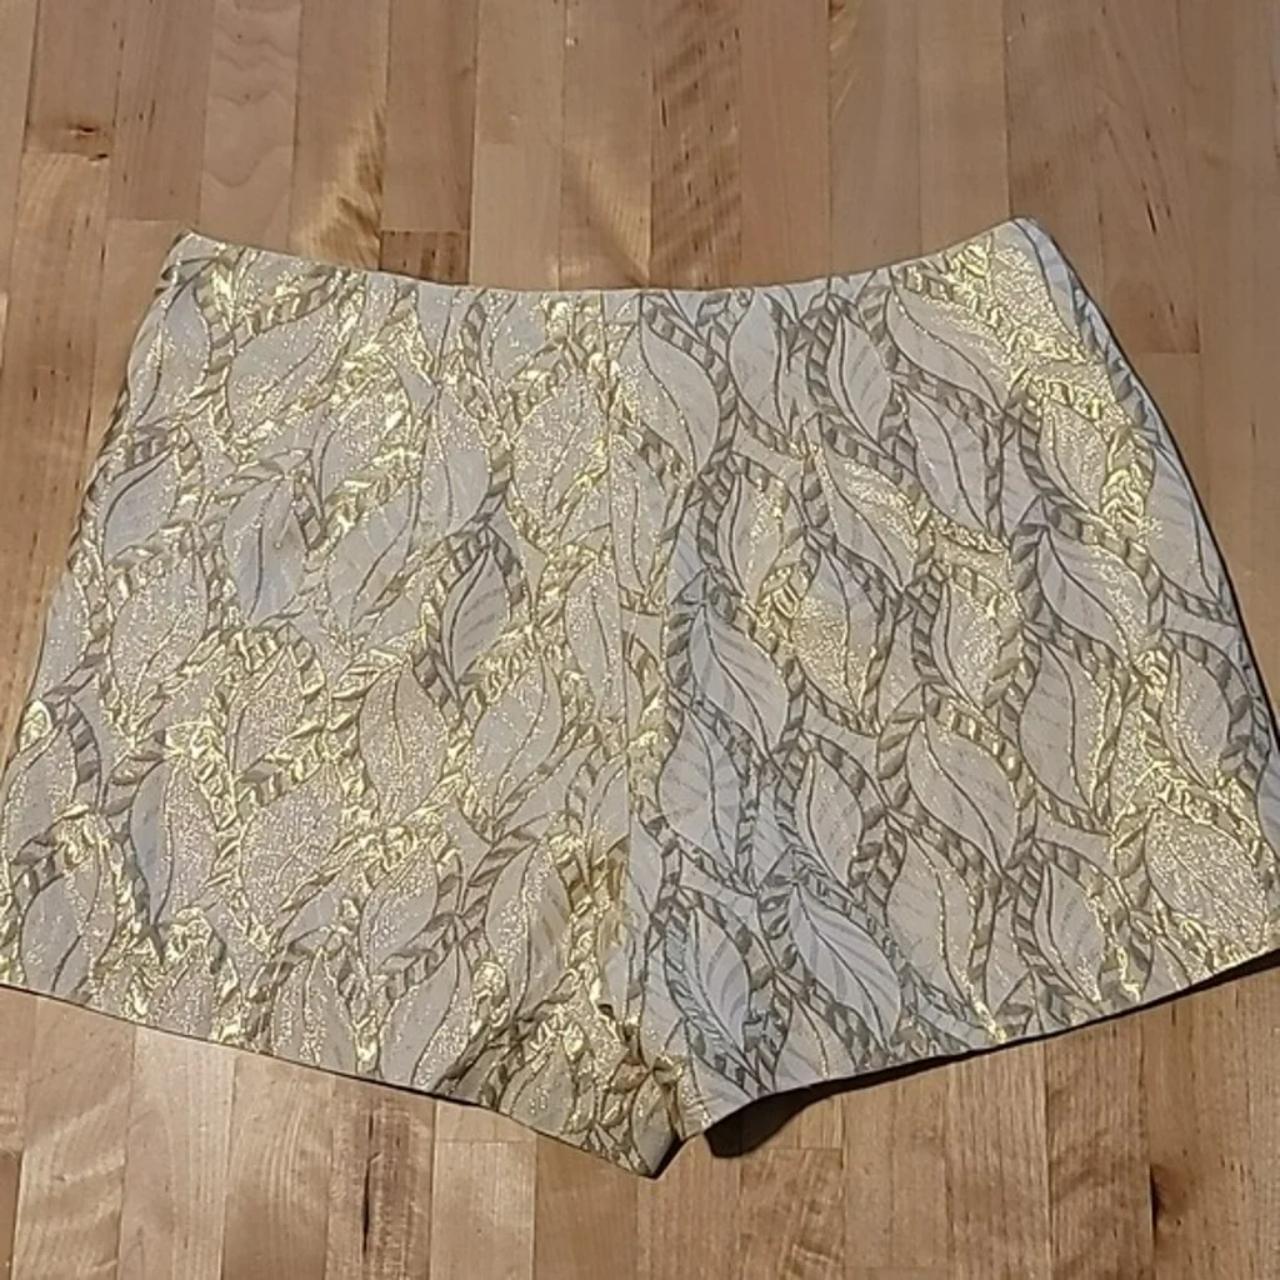 Lilly Pulitzer Women's Gold Shorts | Depop